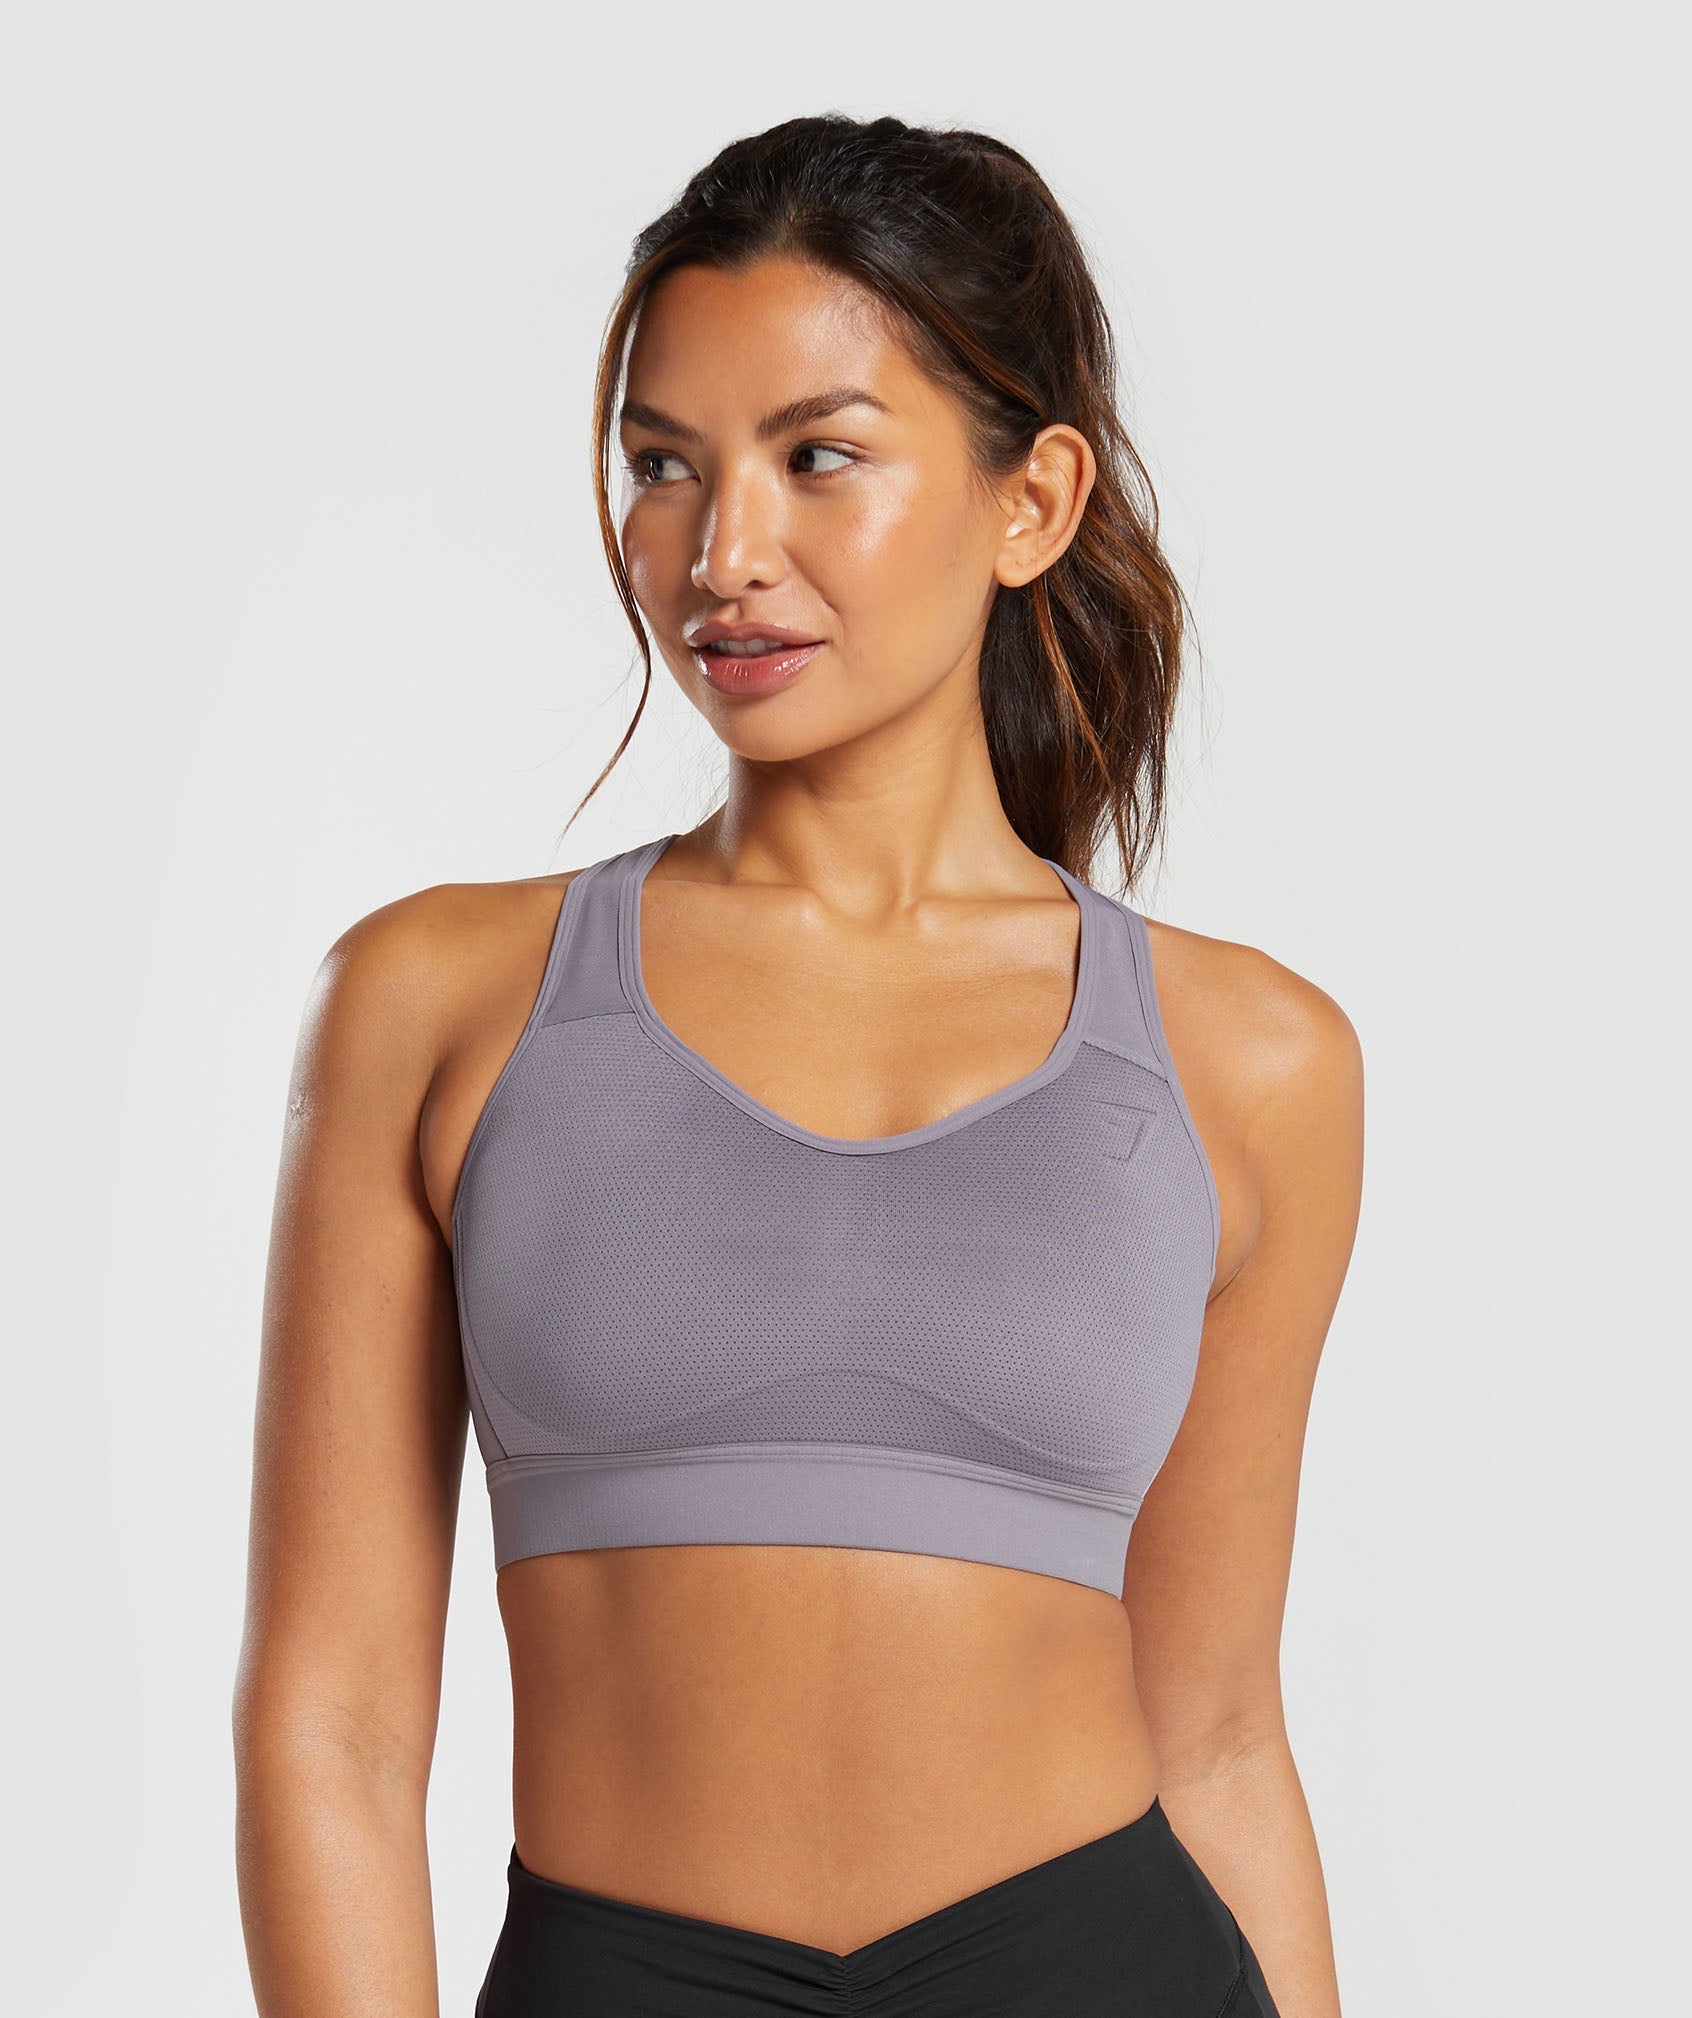 Aerocool High Impact Sports Bra for Fuller Cup Figures